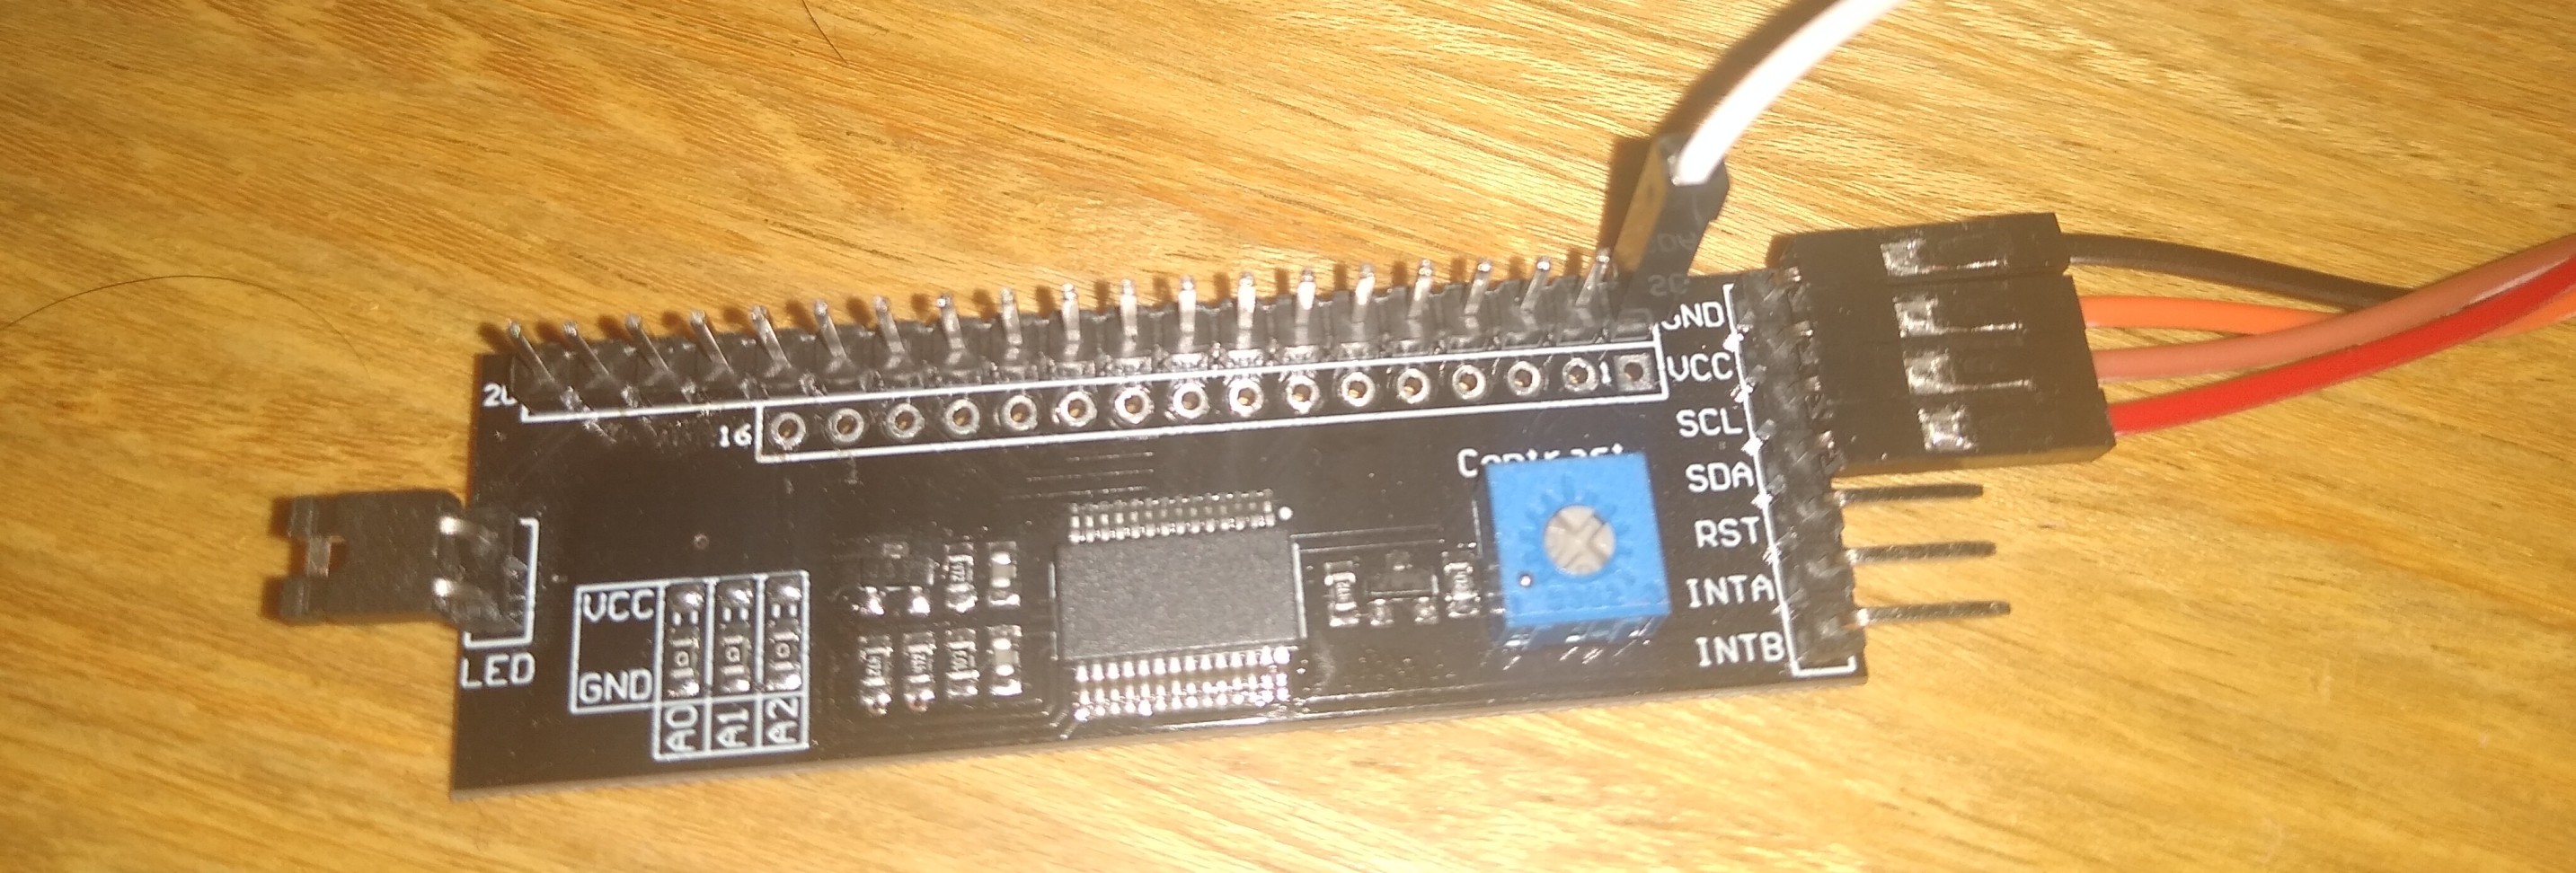 mcp23017 module with the white cable that is GND to test the different pins of the chiche module